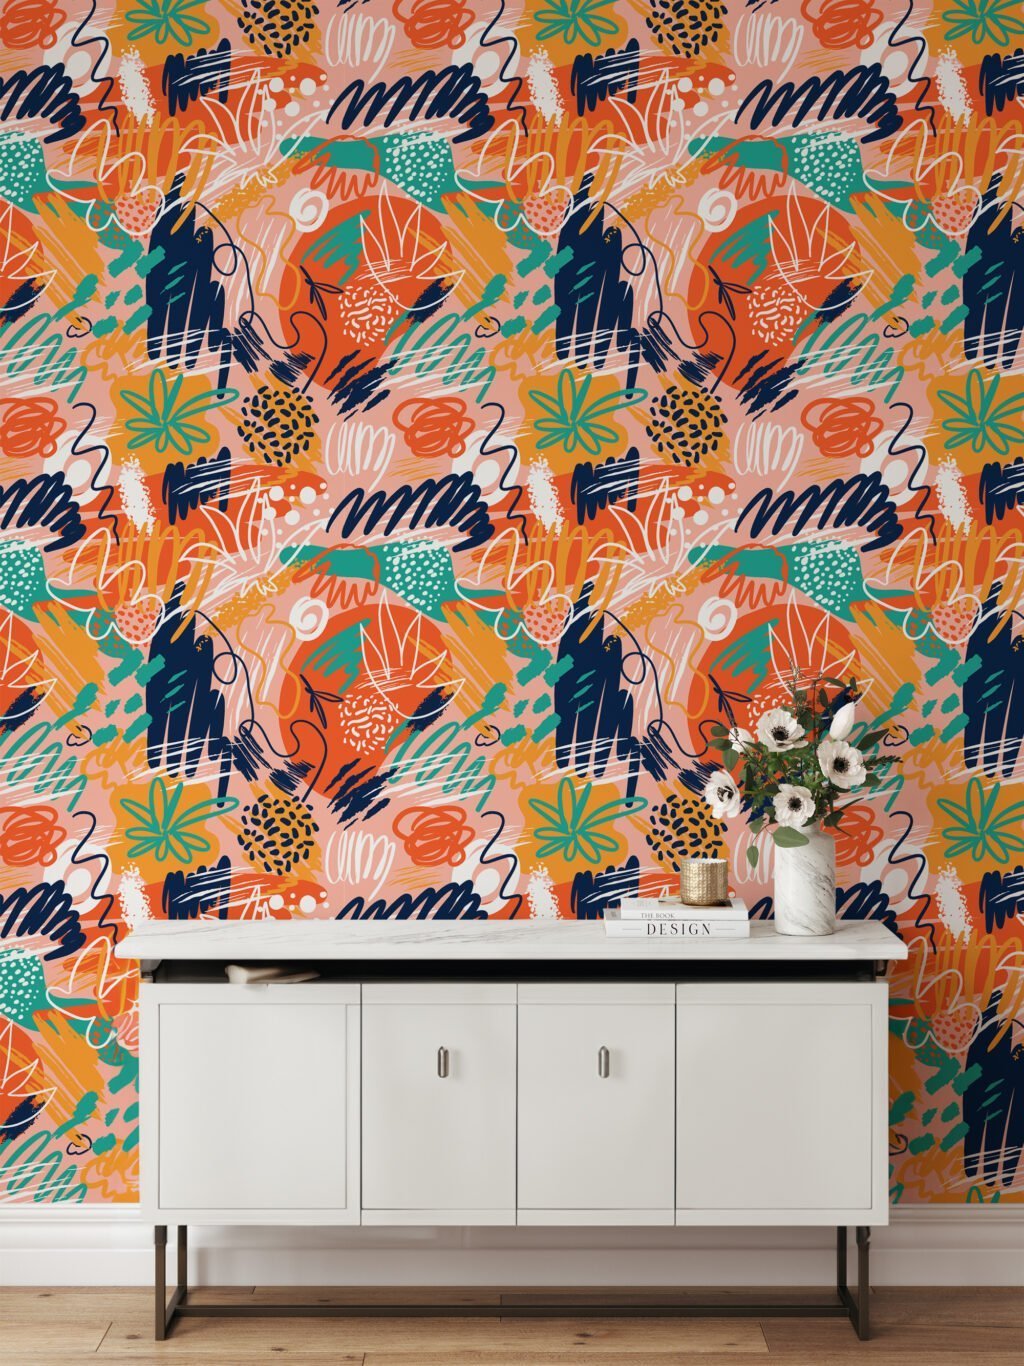 Abstract Colorful Doodles Illustration Wallpaper, Vibrant Tropical Peel & Stick Wall Mural